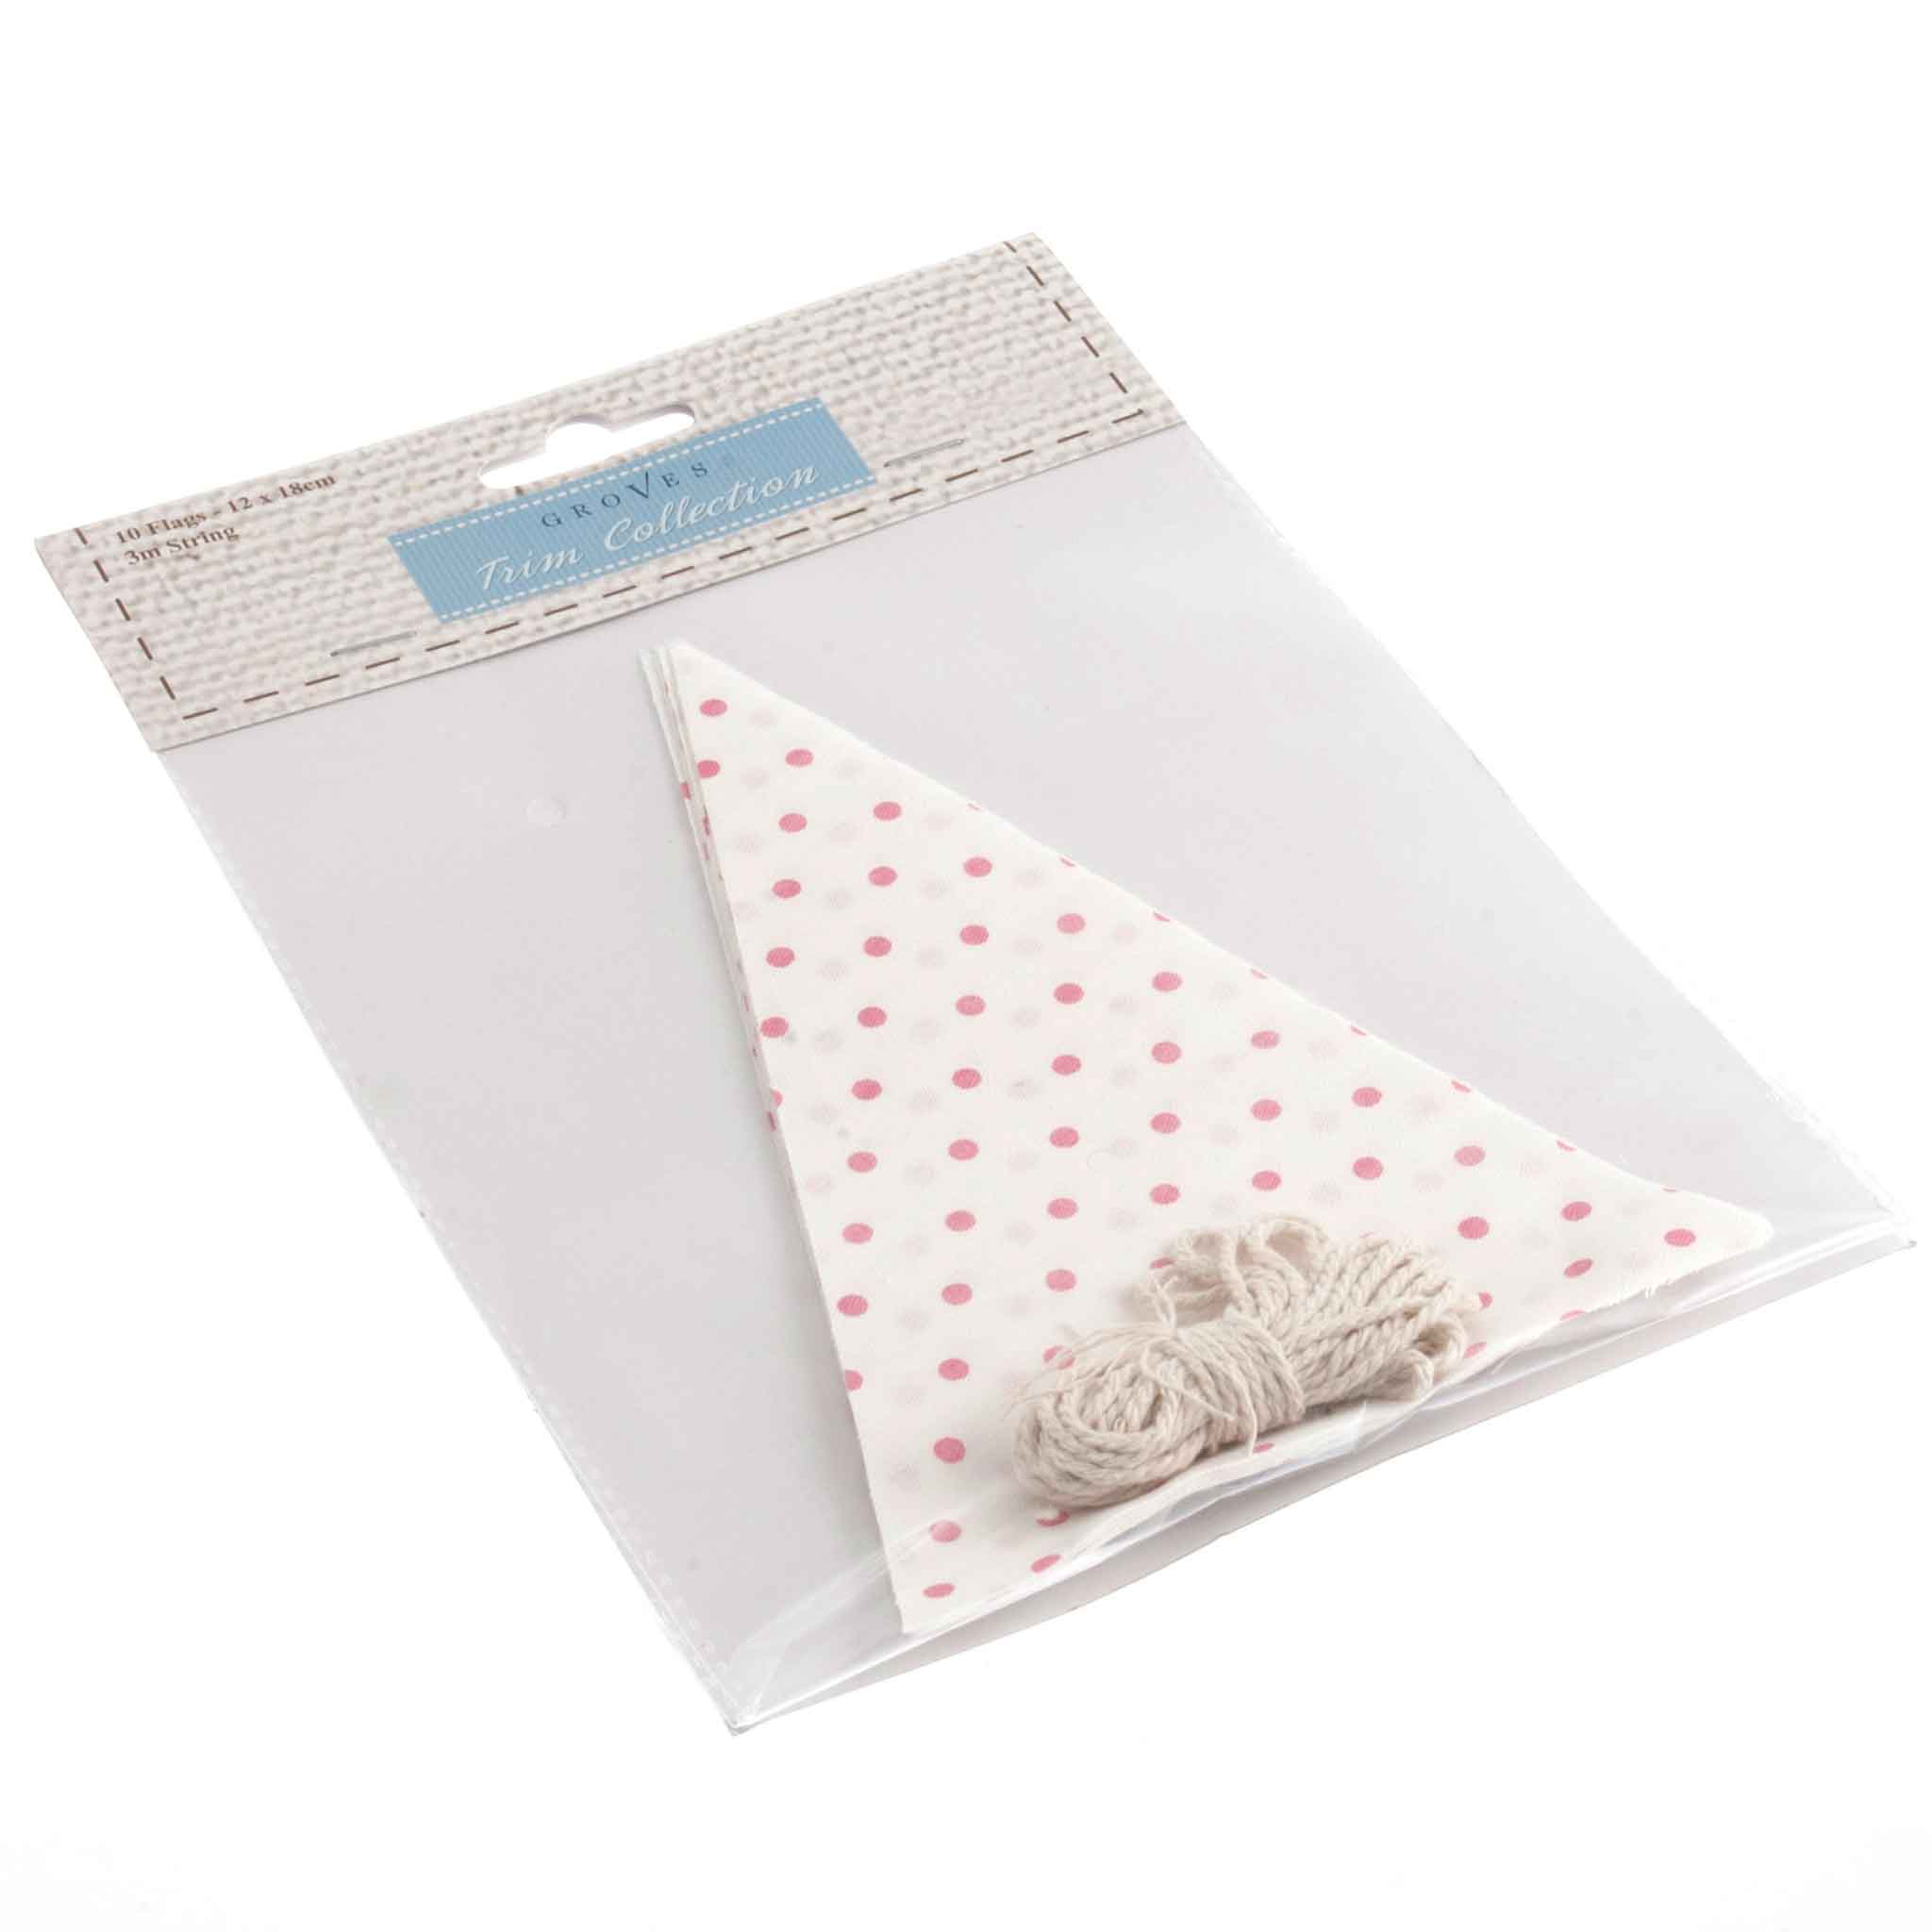 Make Your Own Bunting Kit - White with Pink Spots - Cotton Fabric